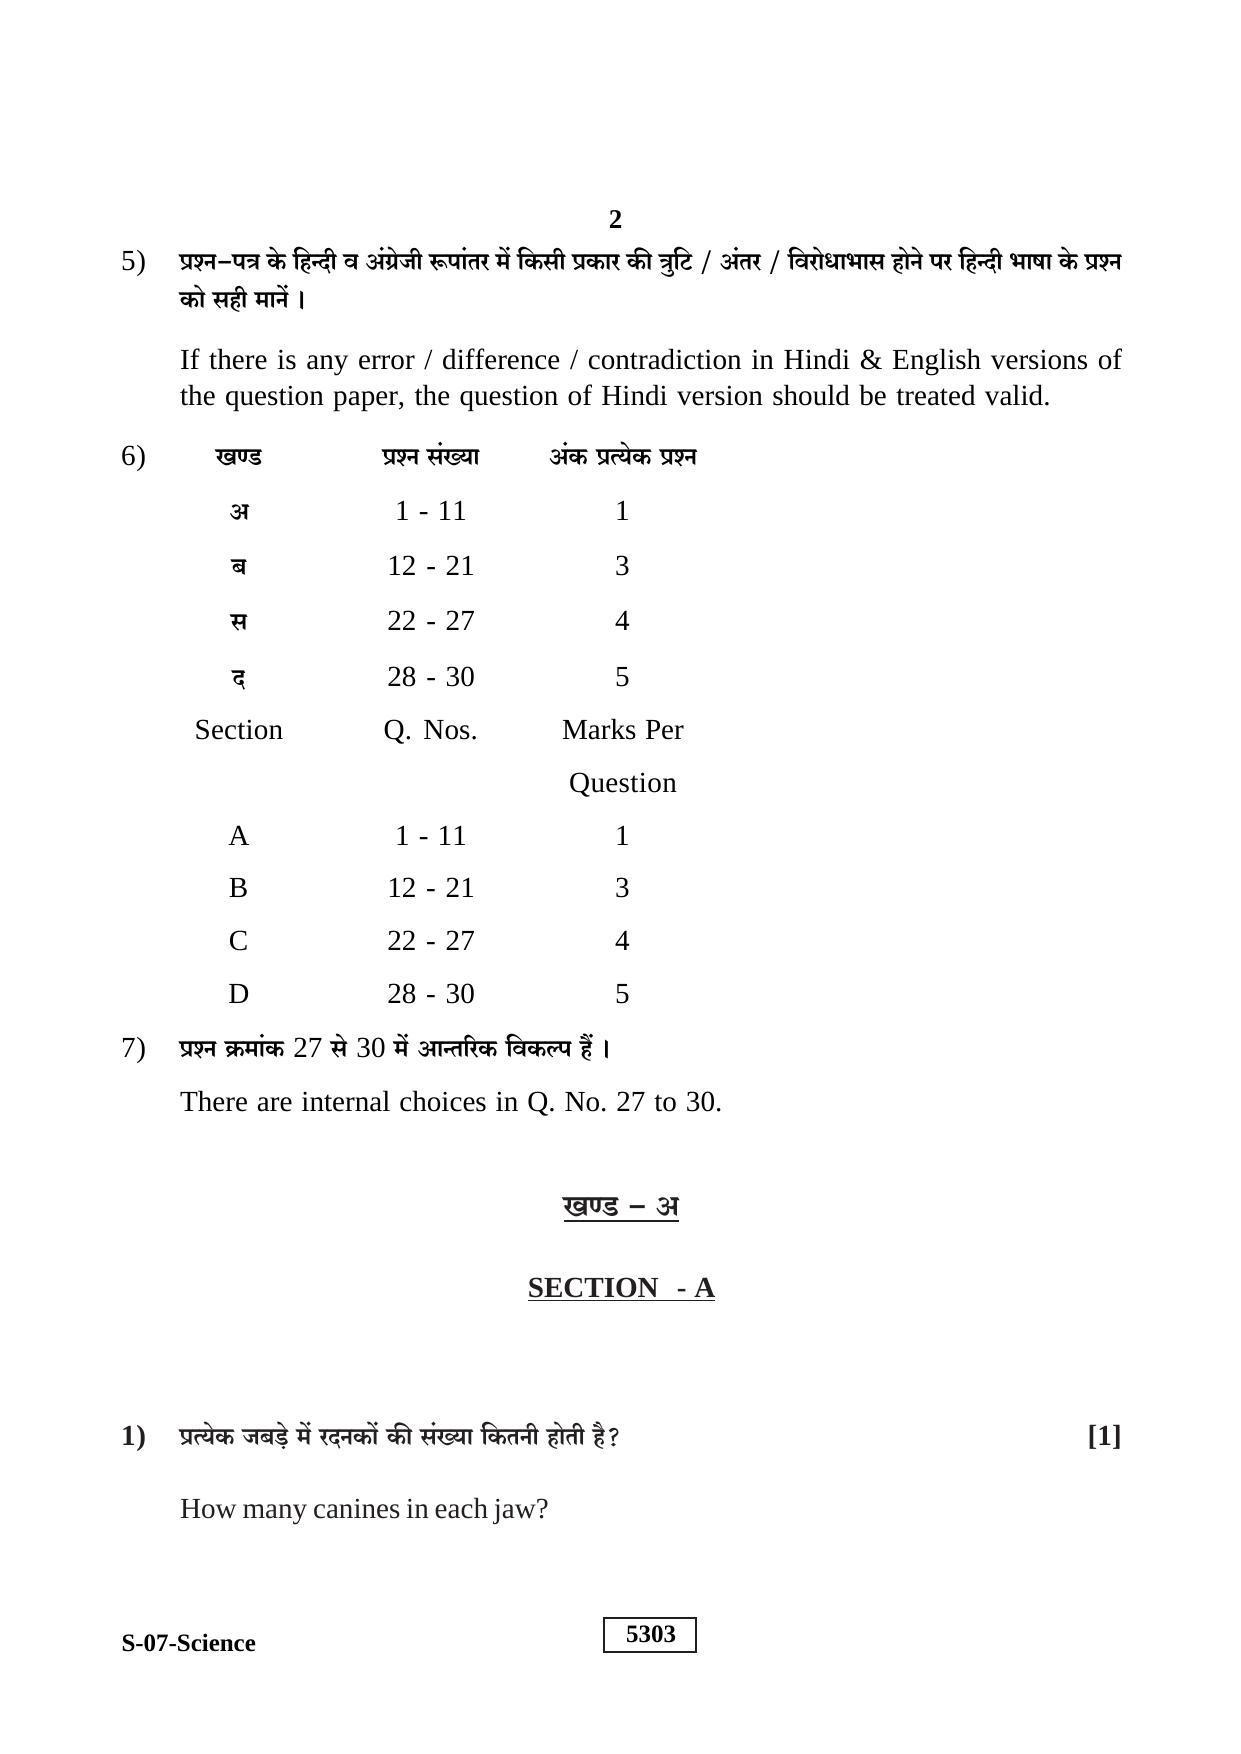 RBSE Class 10 Science 2020 Question Paper - Page 2